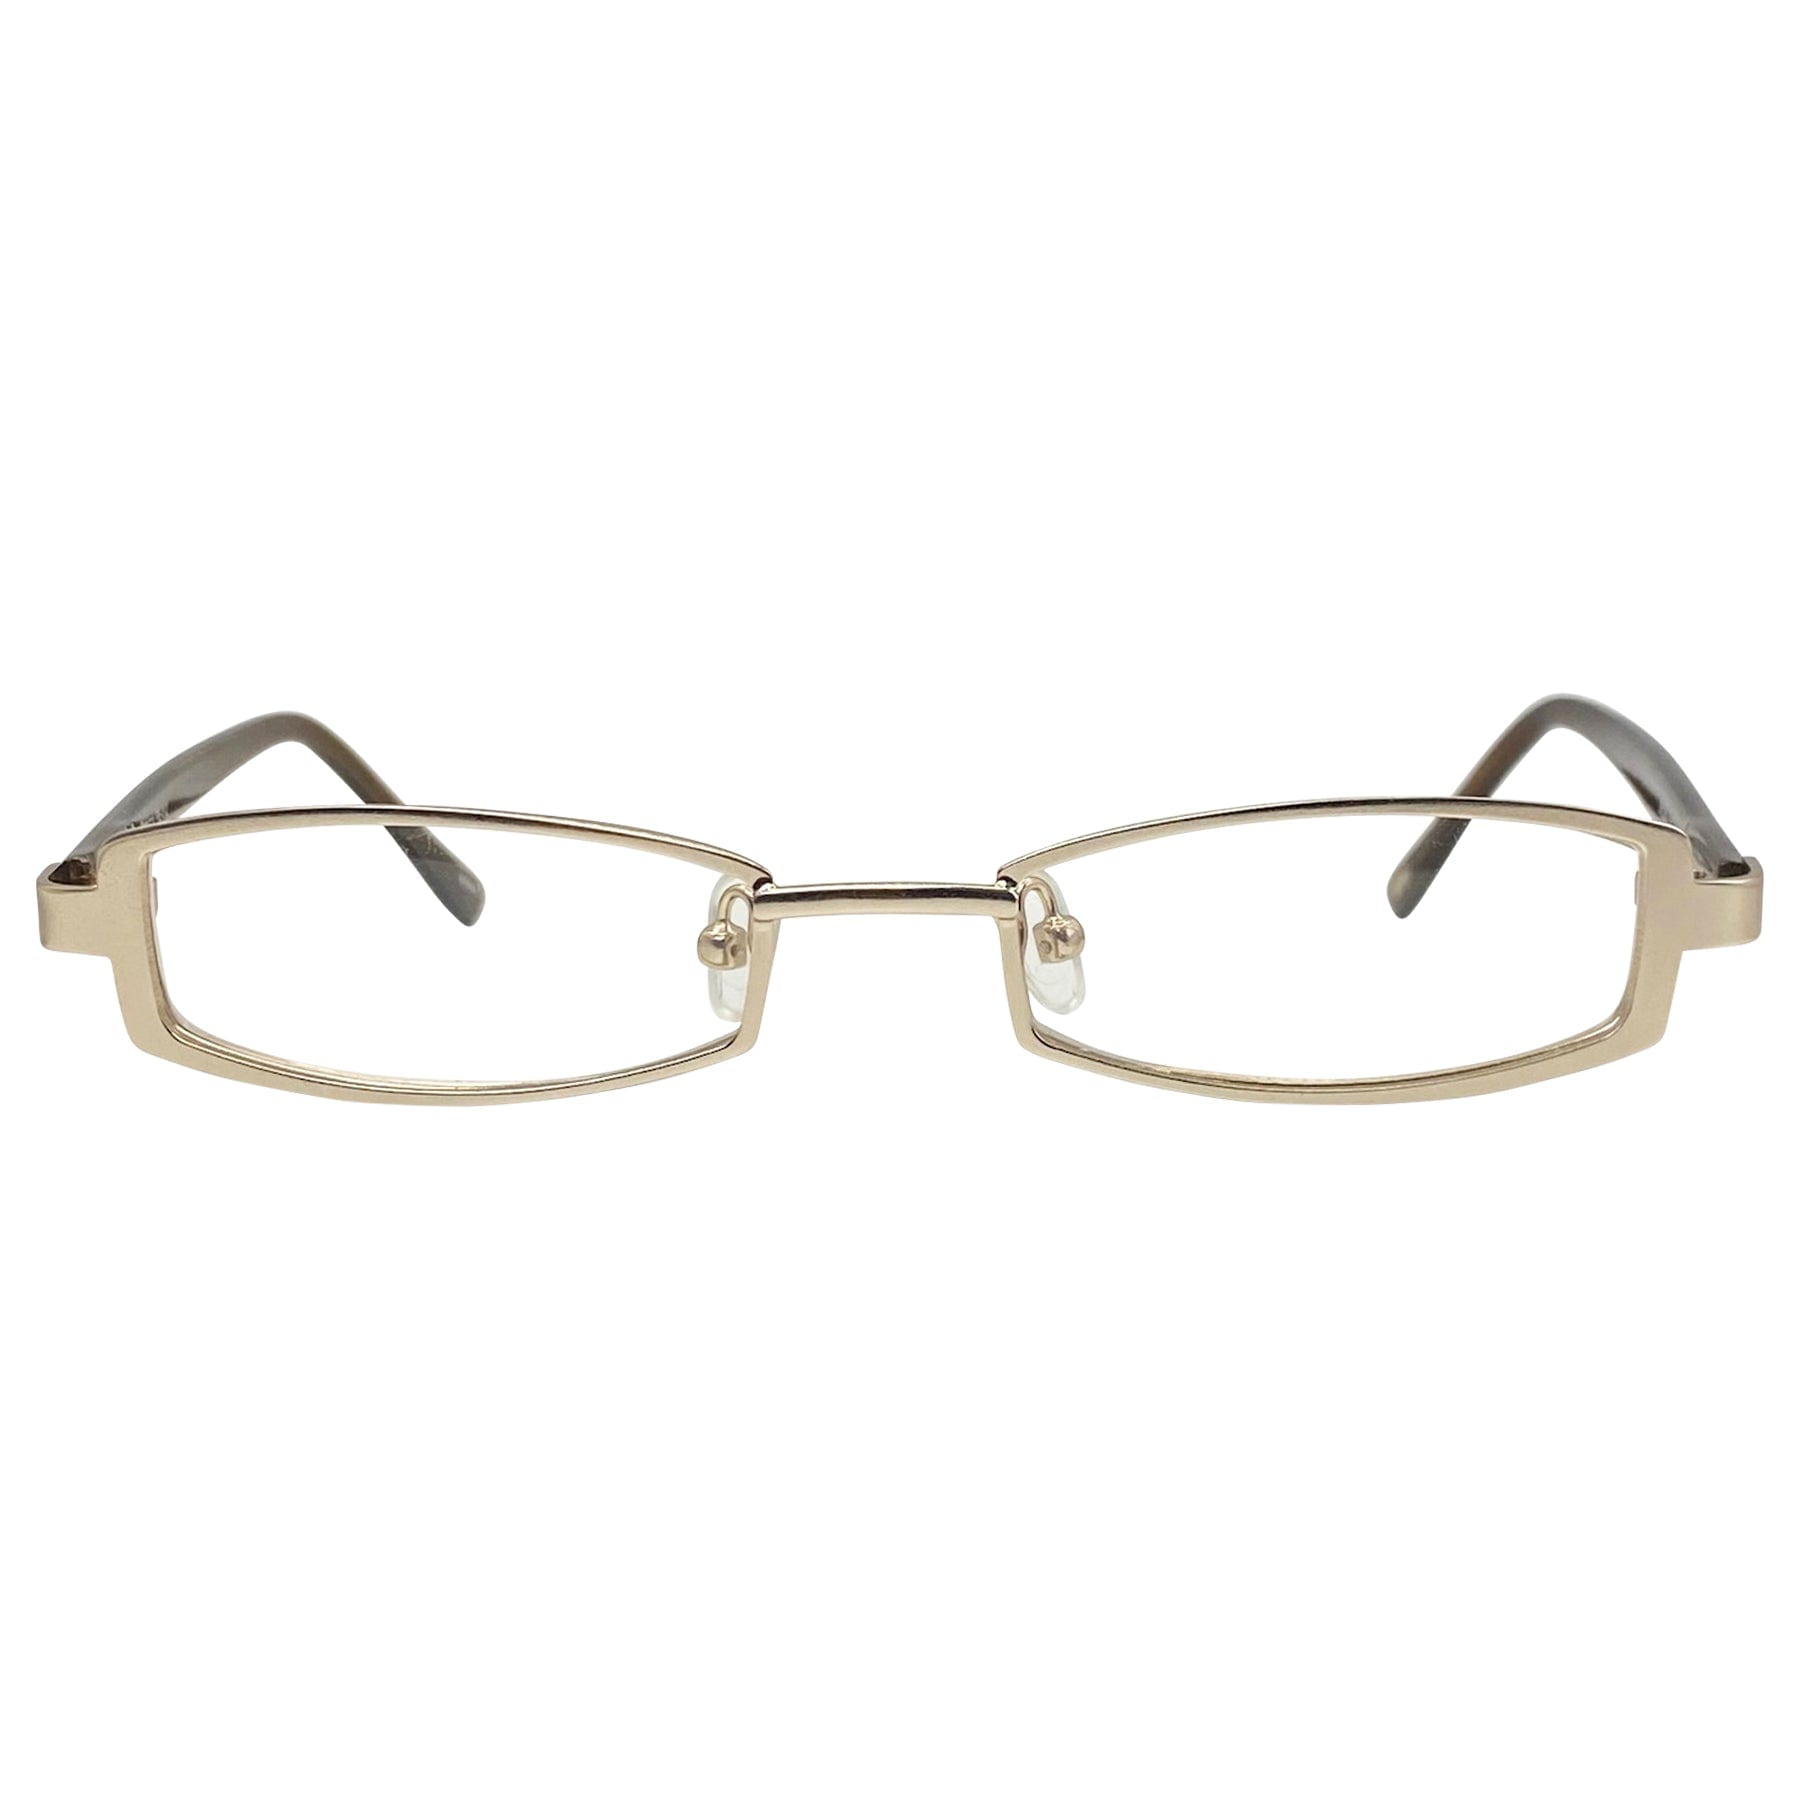 clear fashion glasses with a 90s style and small rectangular frame